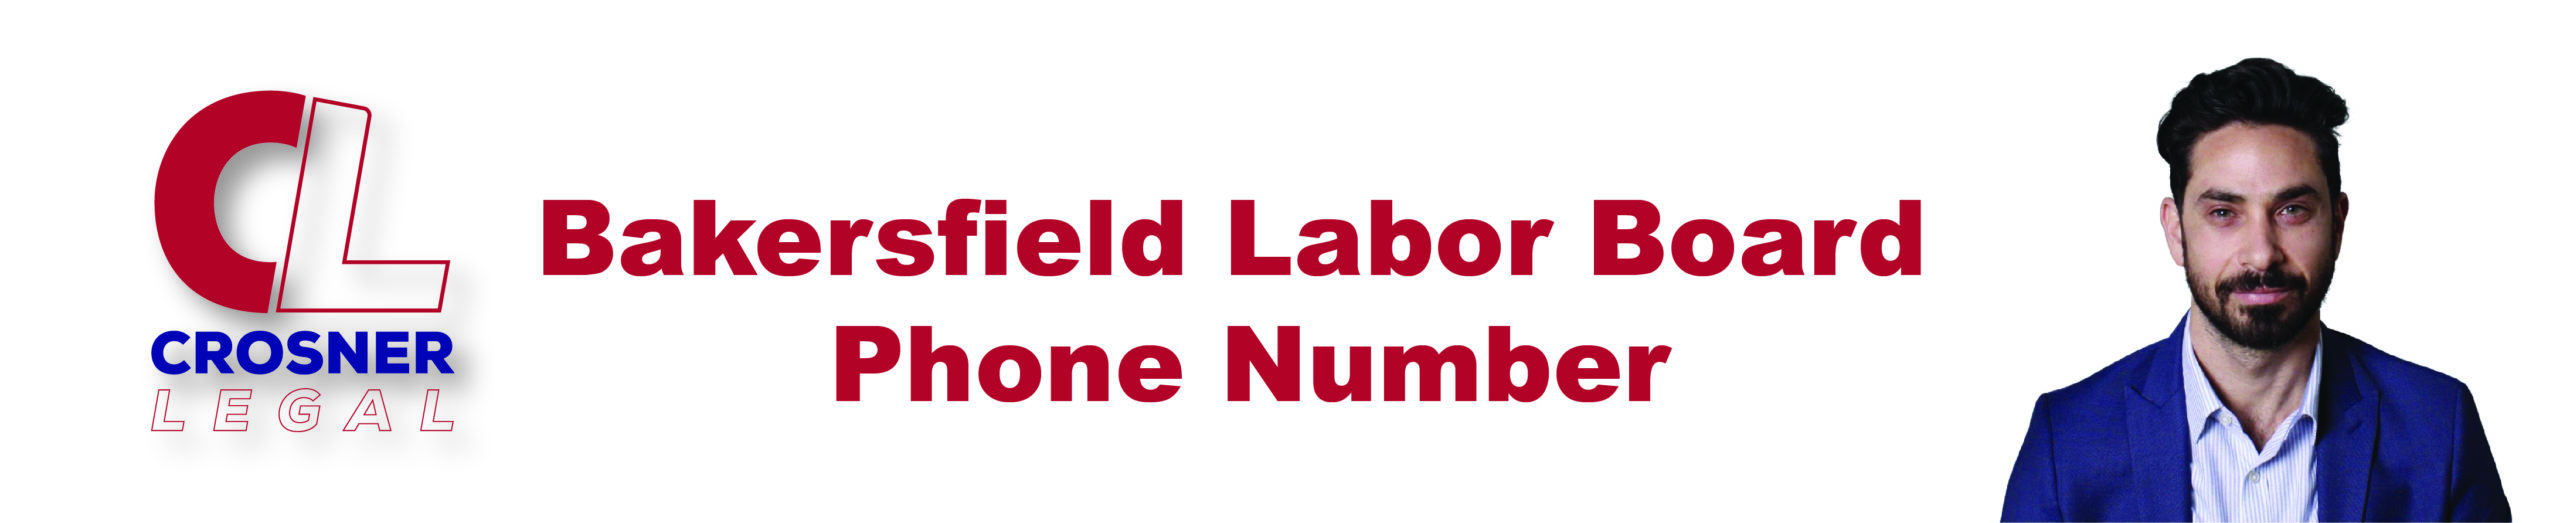 Bakersfield Labor Board Phone Number